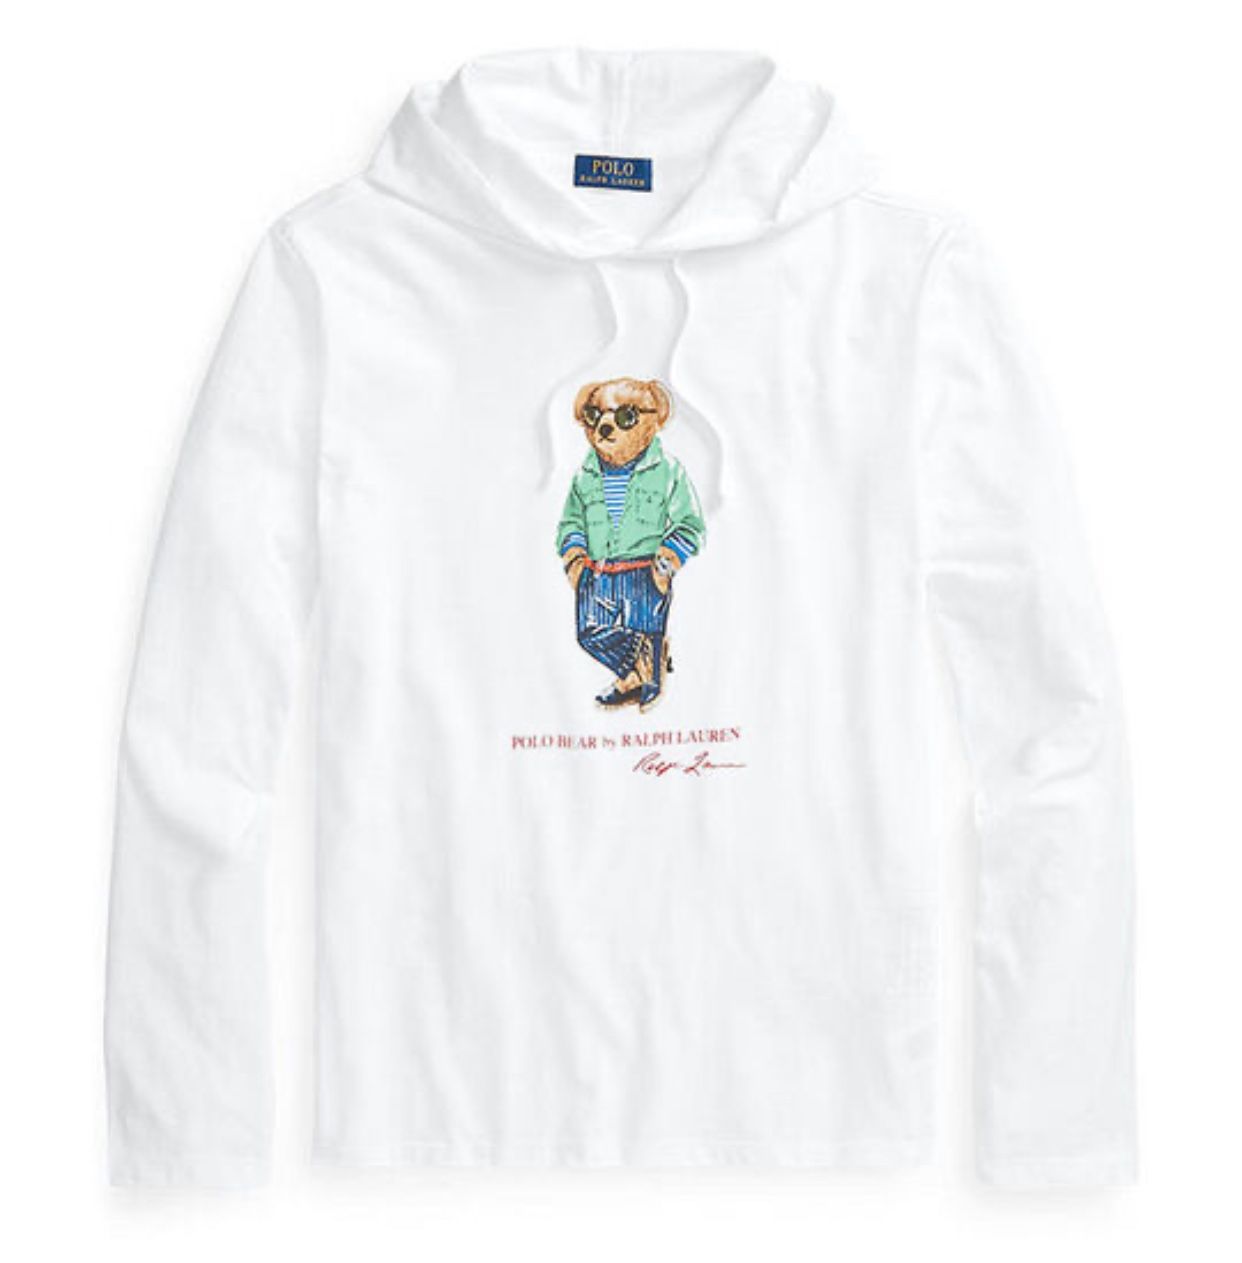 Ralph Lauren Polo Bear Jersey Hooded T-Shirt, available sizes XL and XXL, NWT 